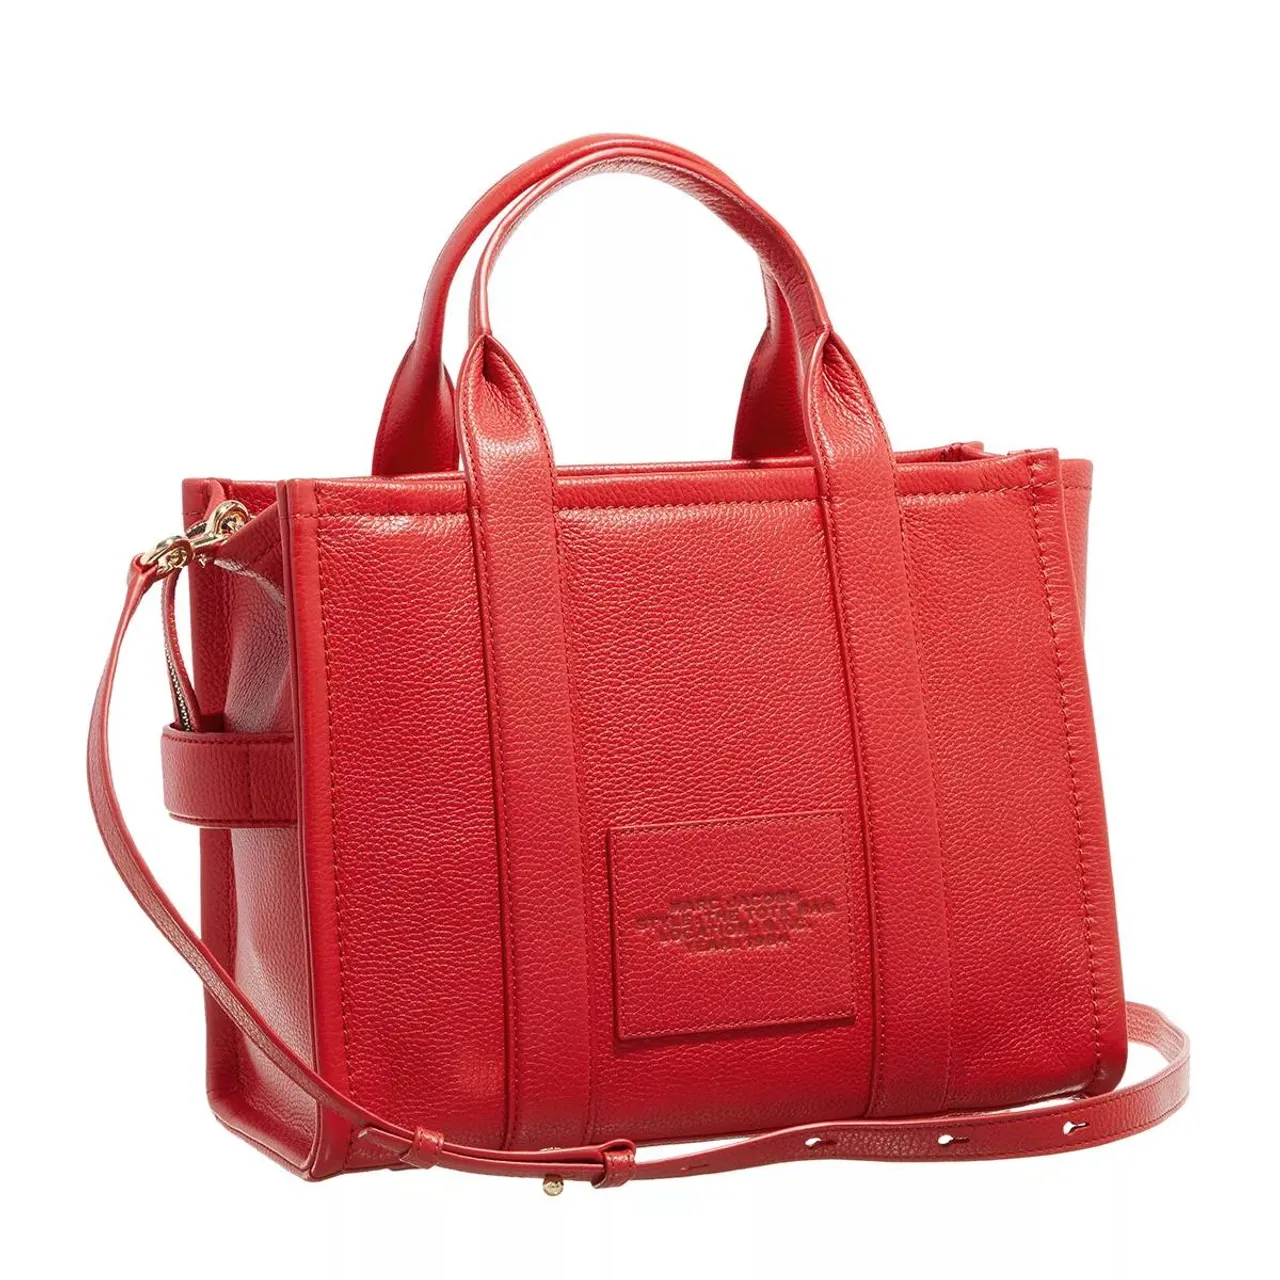 Marc Jacobs Tote Bags - The Medium Tote - red - Tote Bags for ladies